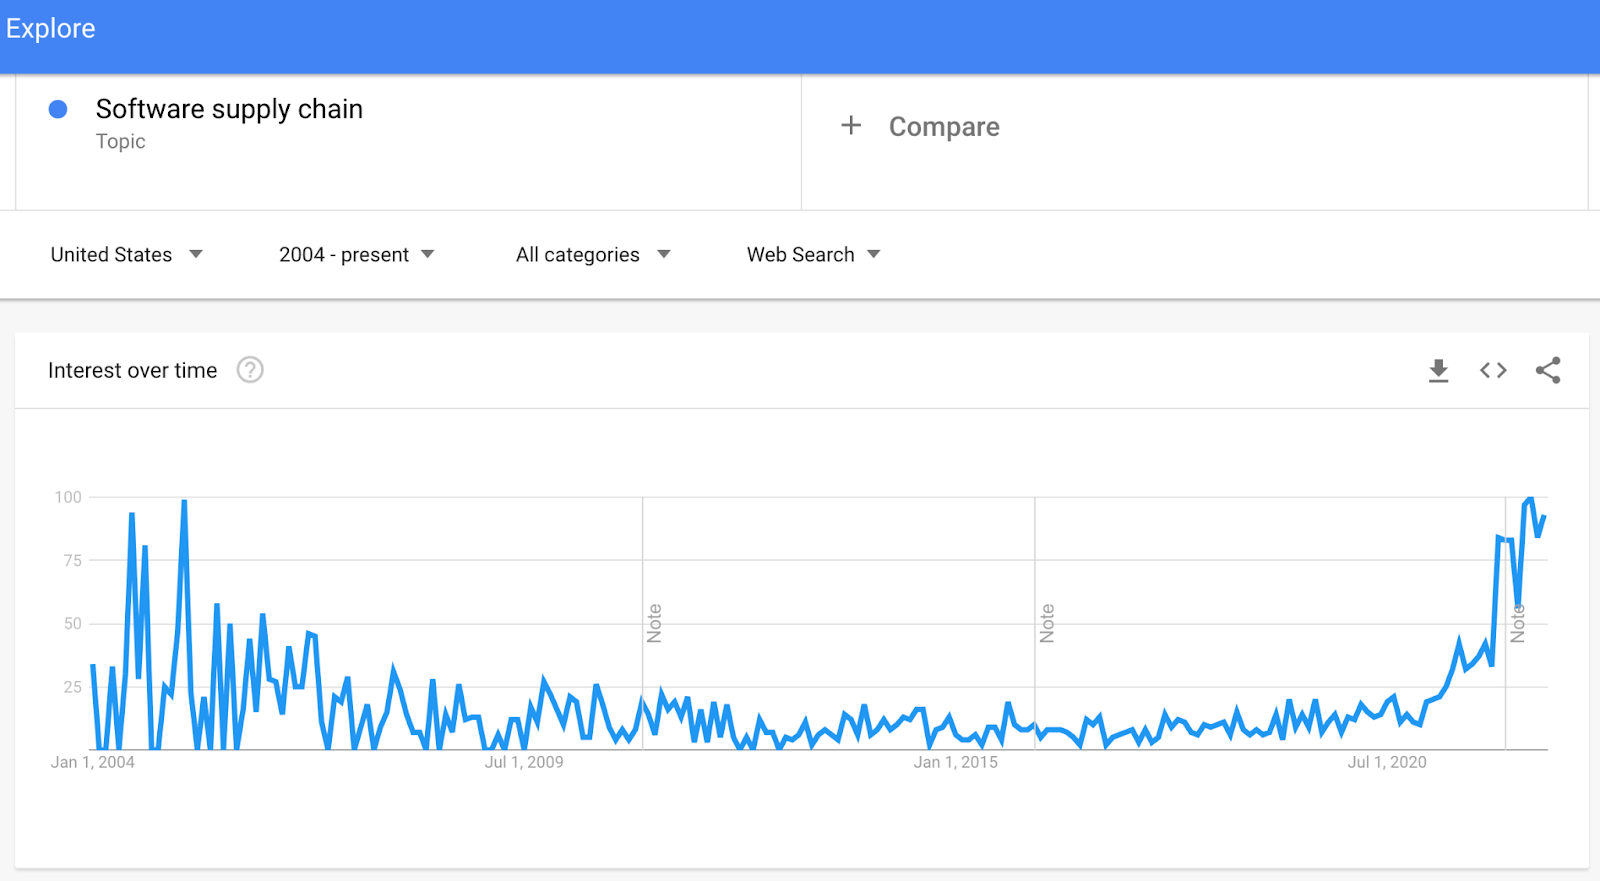 Google Trends graph of software supply chain interest over time.